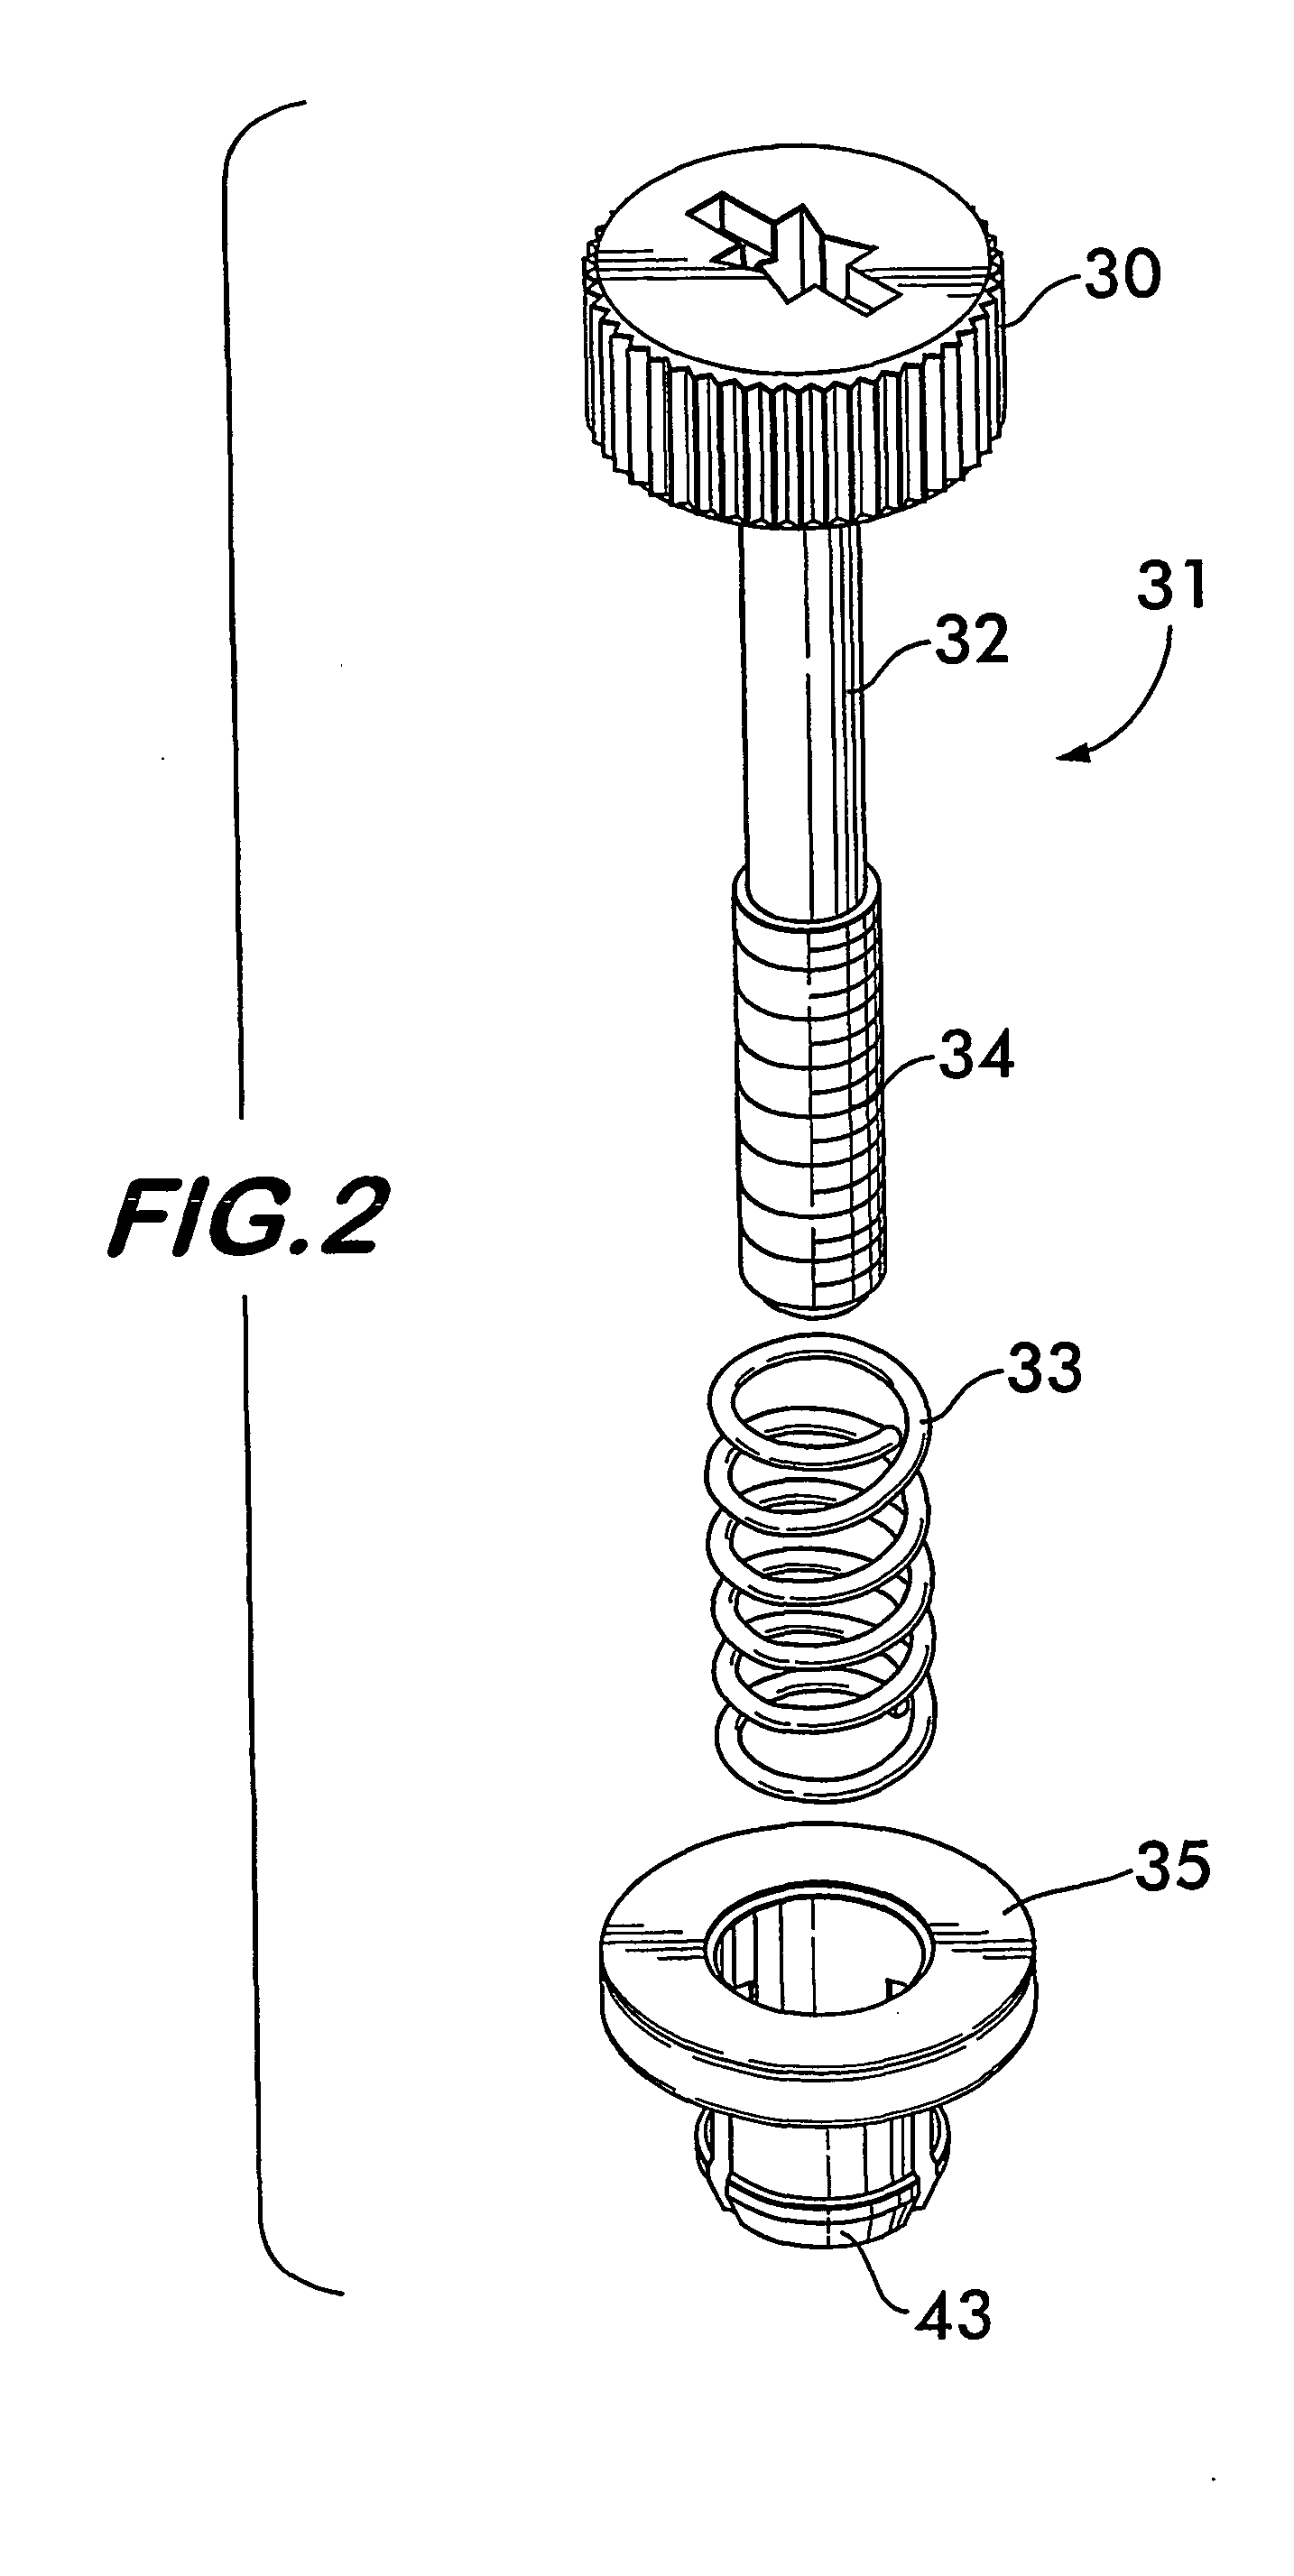 Two-part snap-together panel fastener